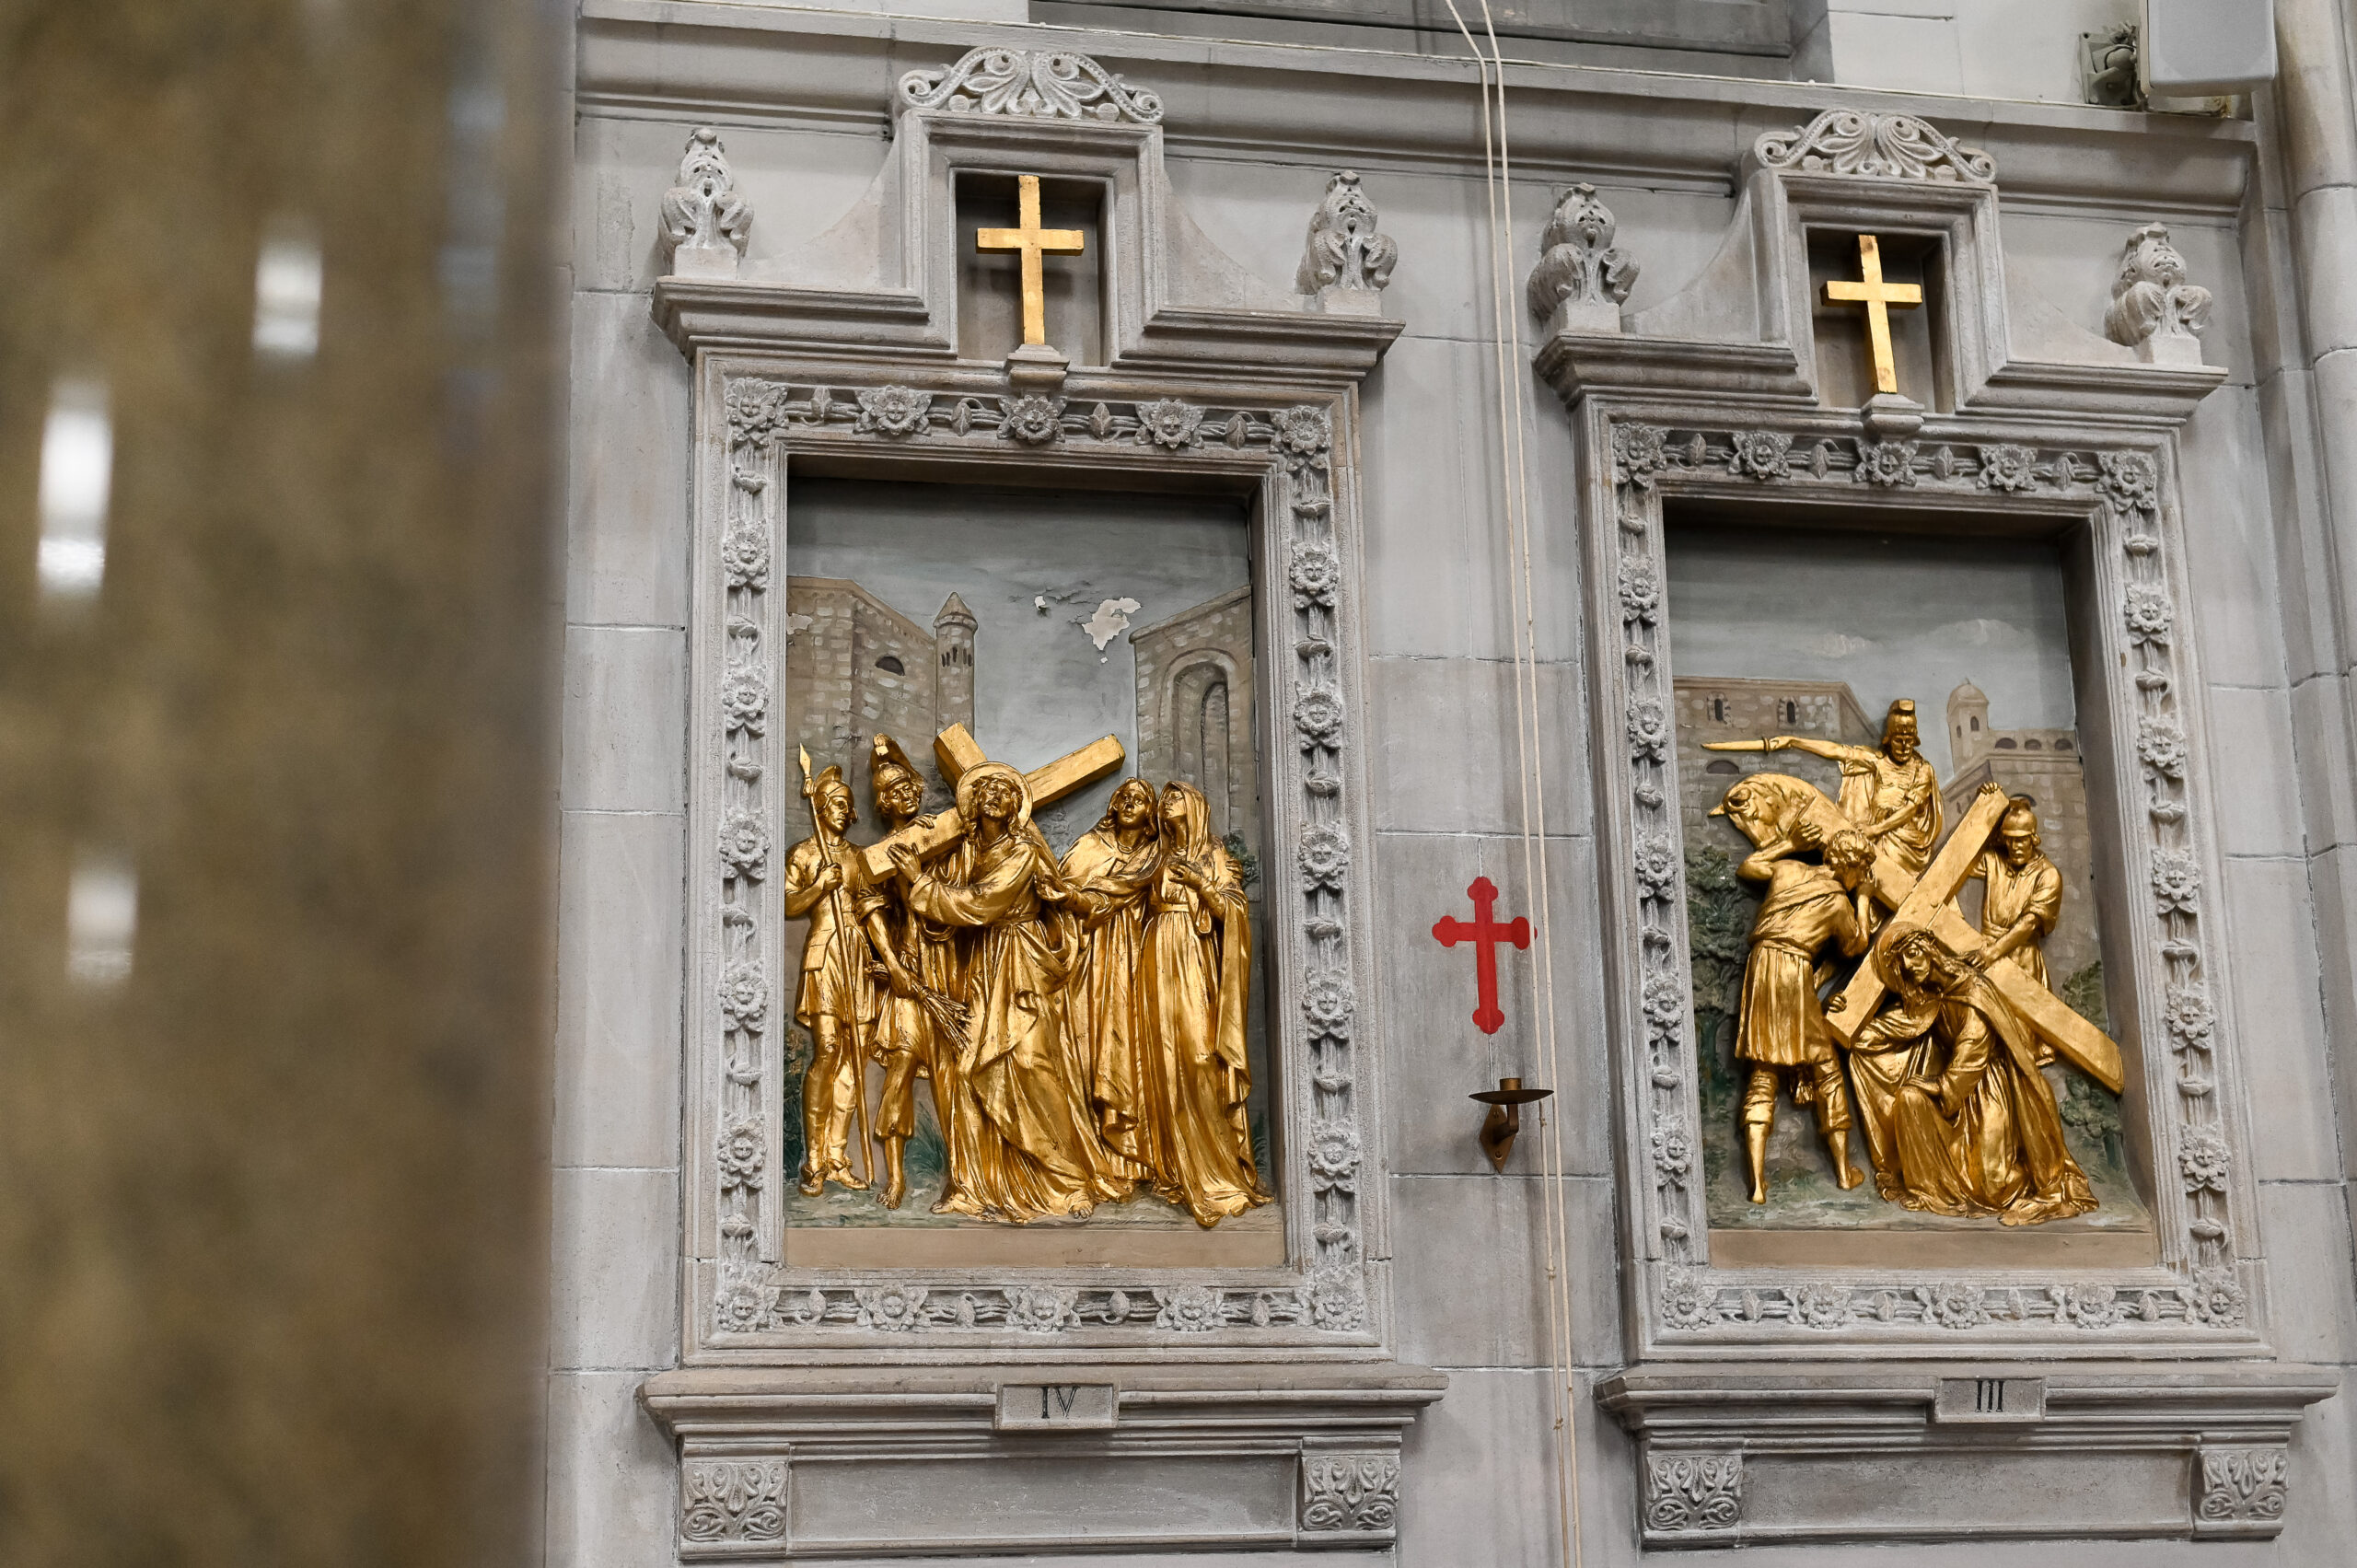 Religious carvings in gold depicting biblical scenes on church doors, flanked by crosses, in an architectural setting with a glimpse of a reflective surface on the left.